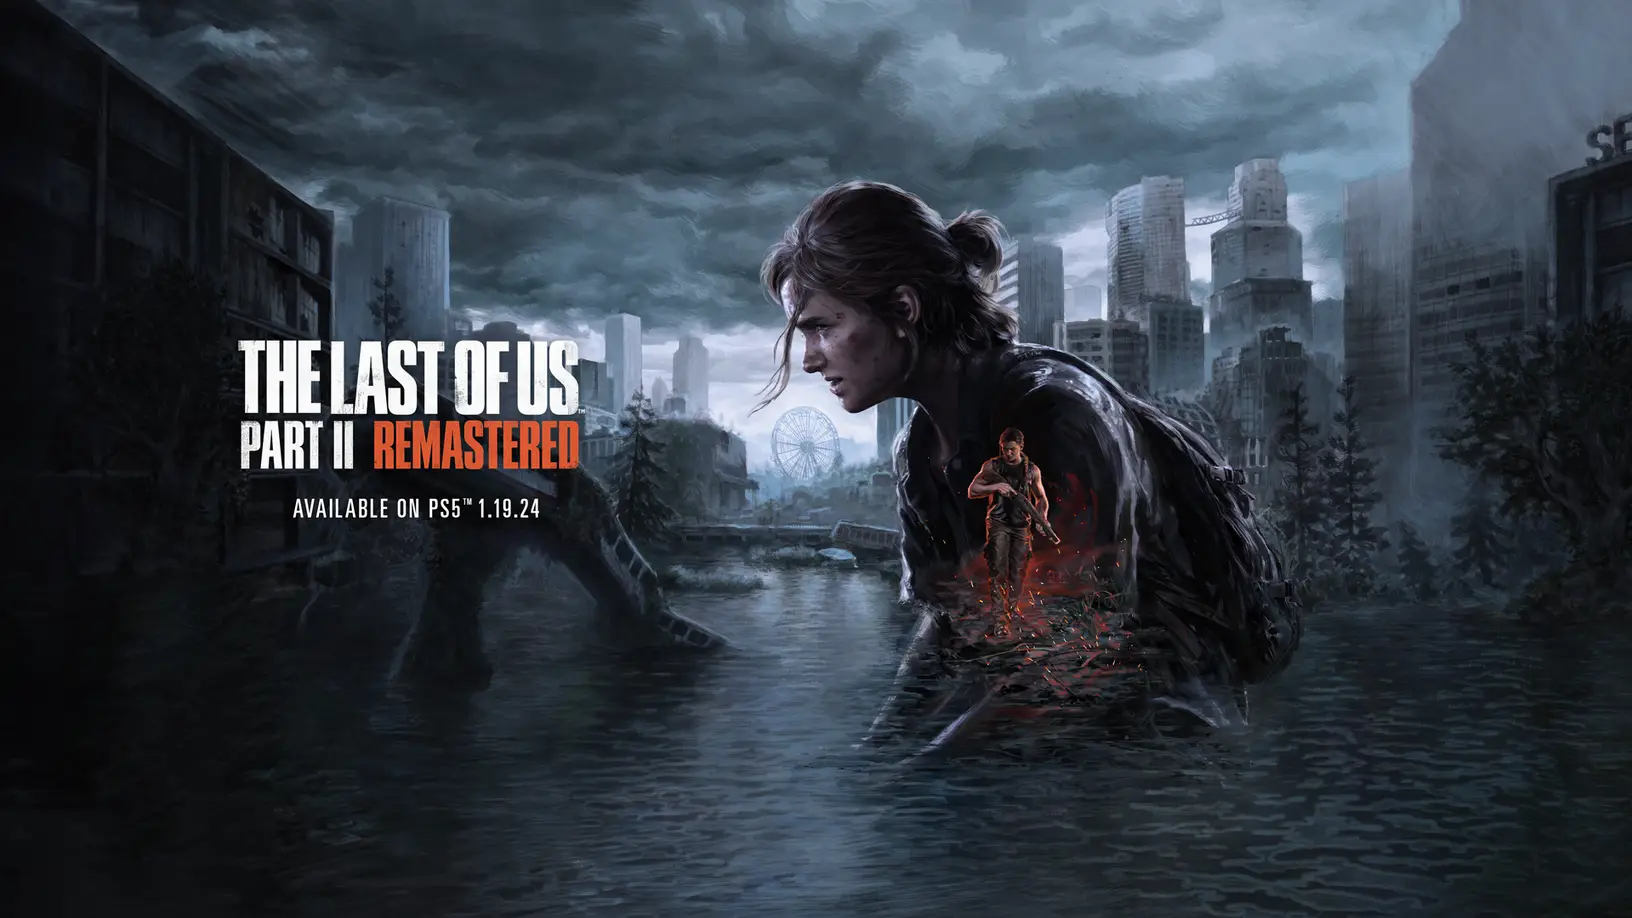 The Last of Us Part II Remastered is coming to PS5 on January 19, 2024